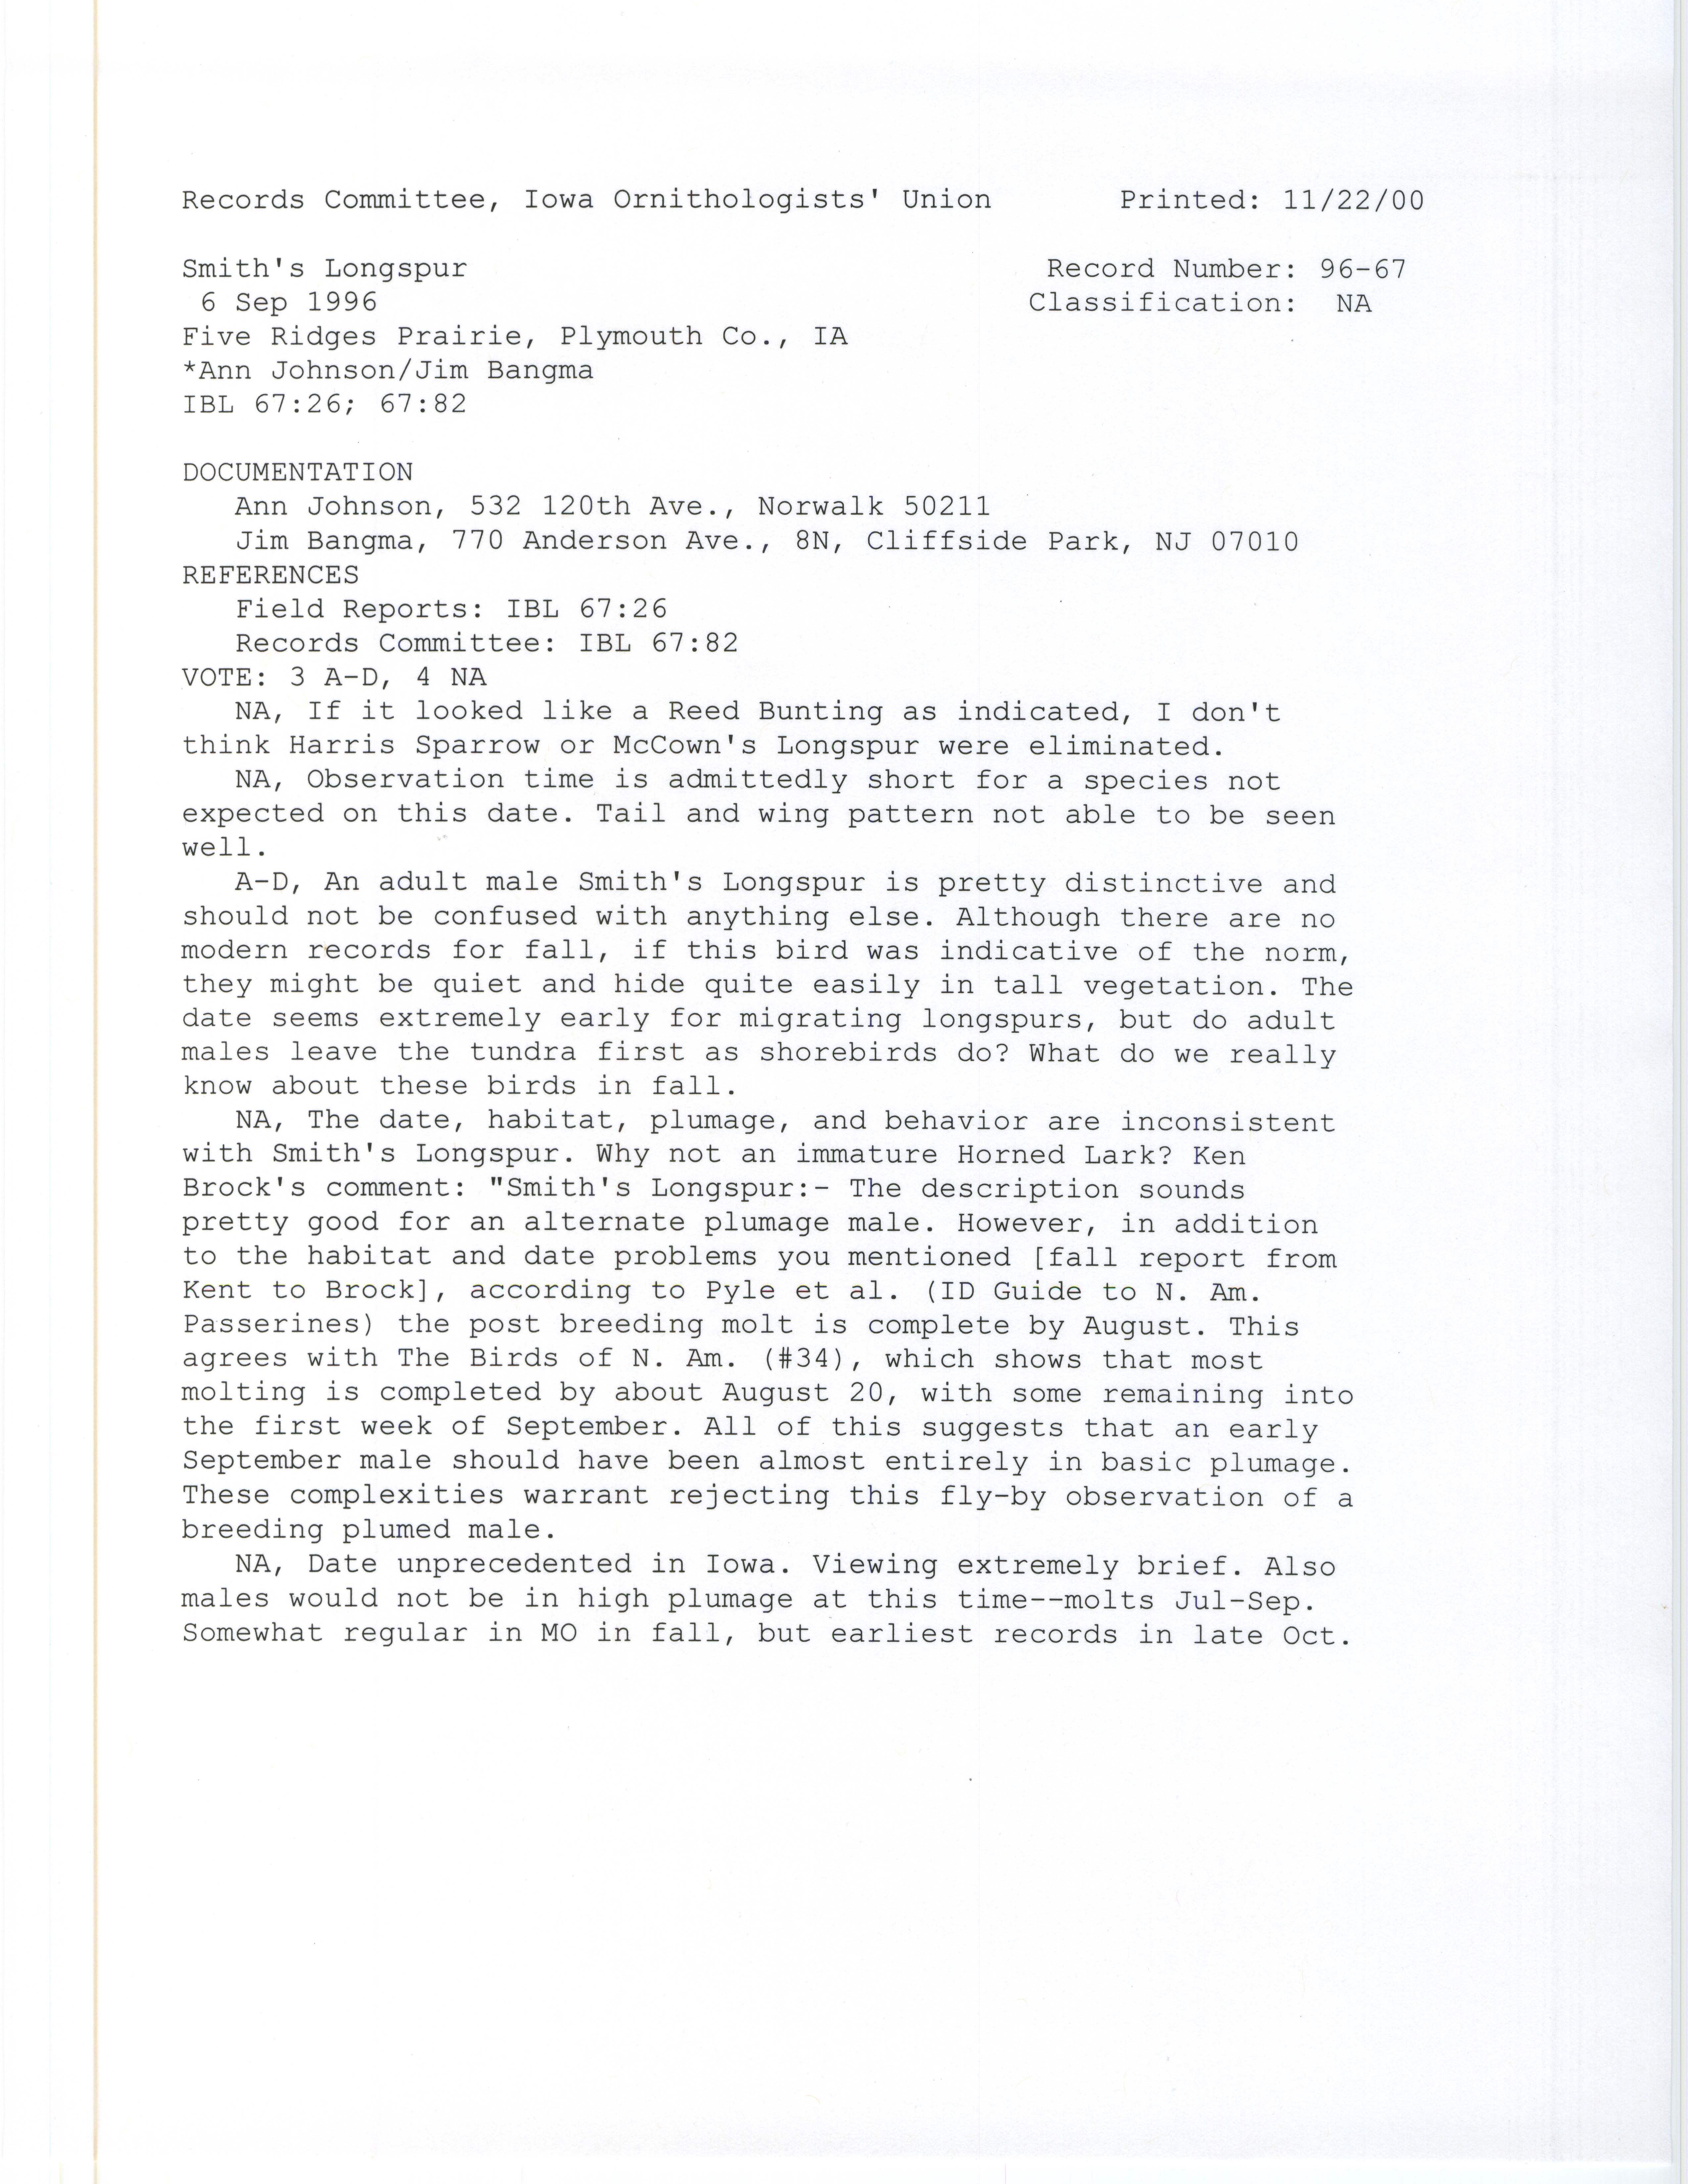 Records Committee review for rare bird sighting for Smith's Longspur at Five Ridges Prairie, 1996